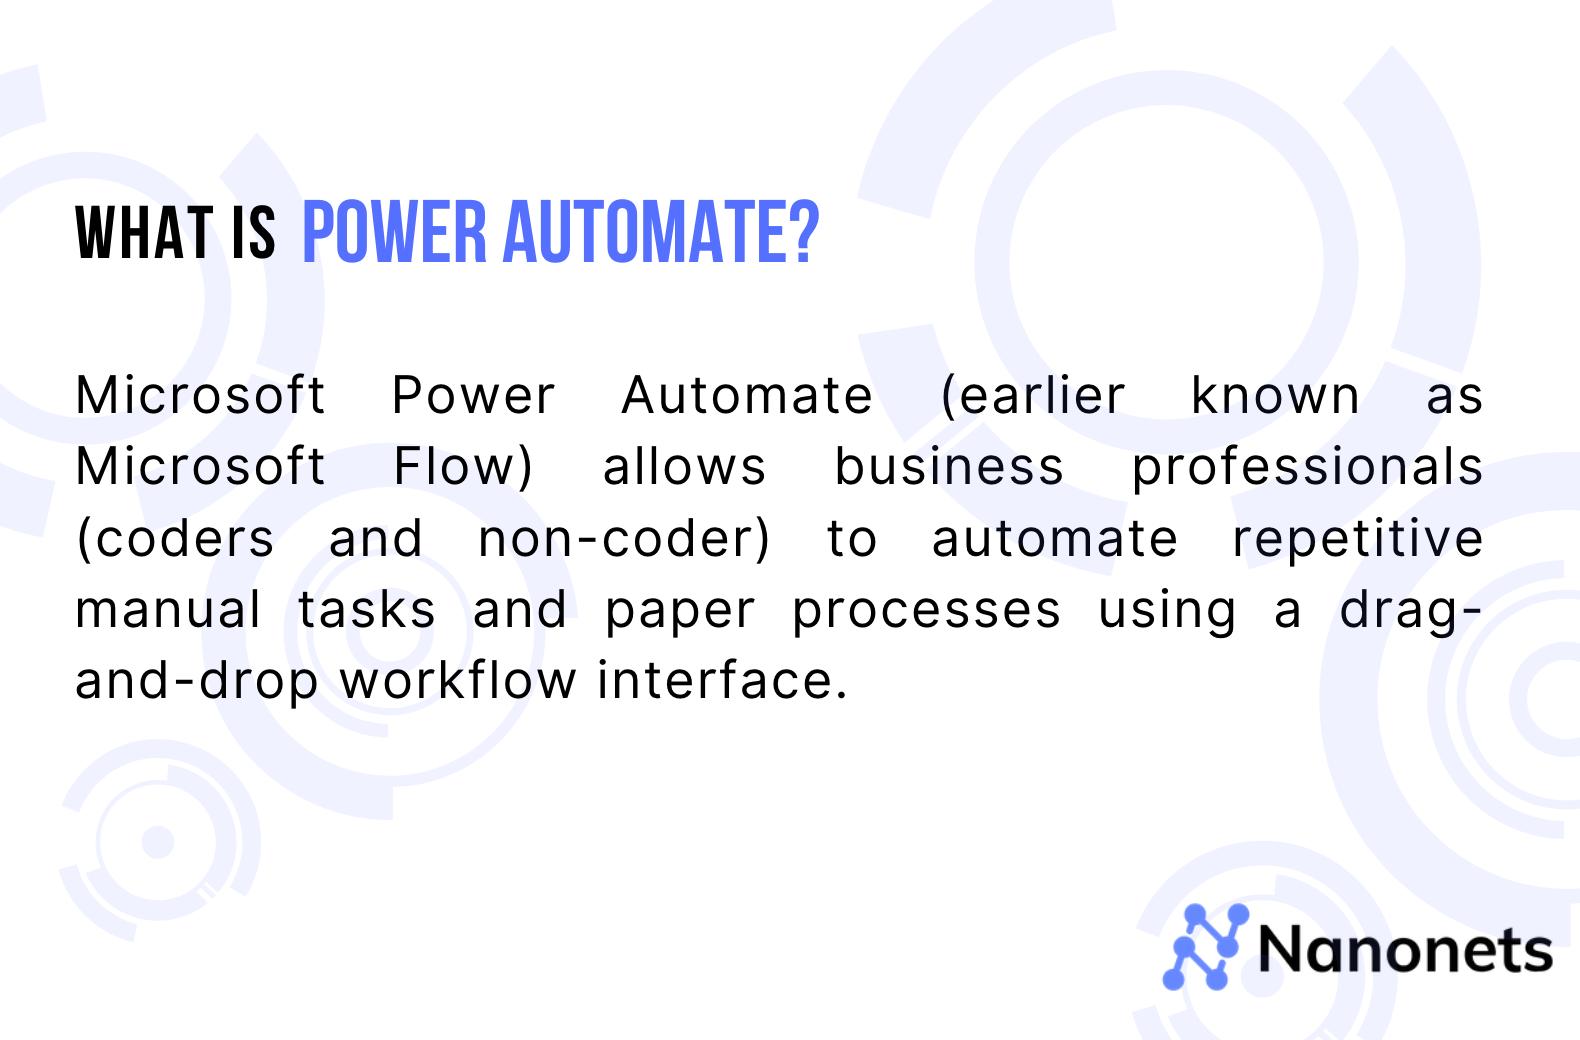 What is power automate?